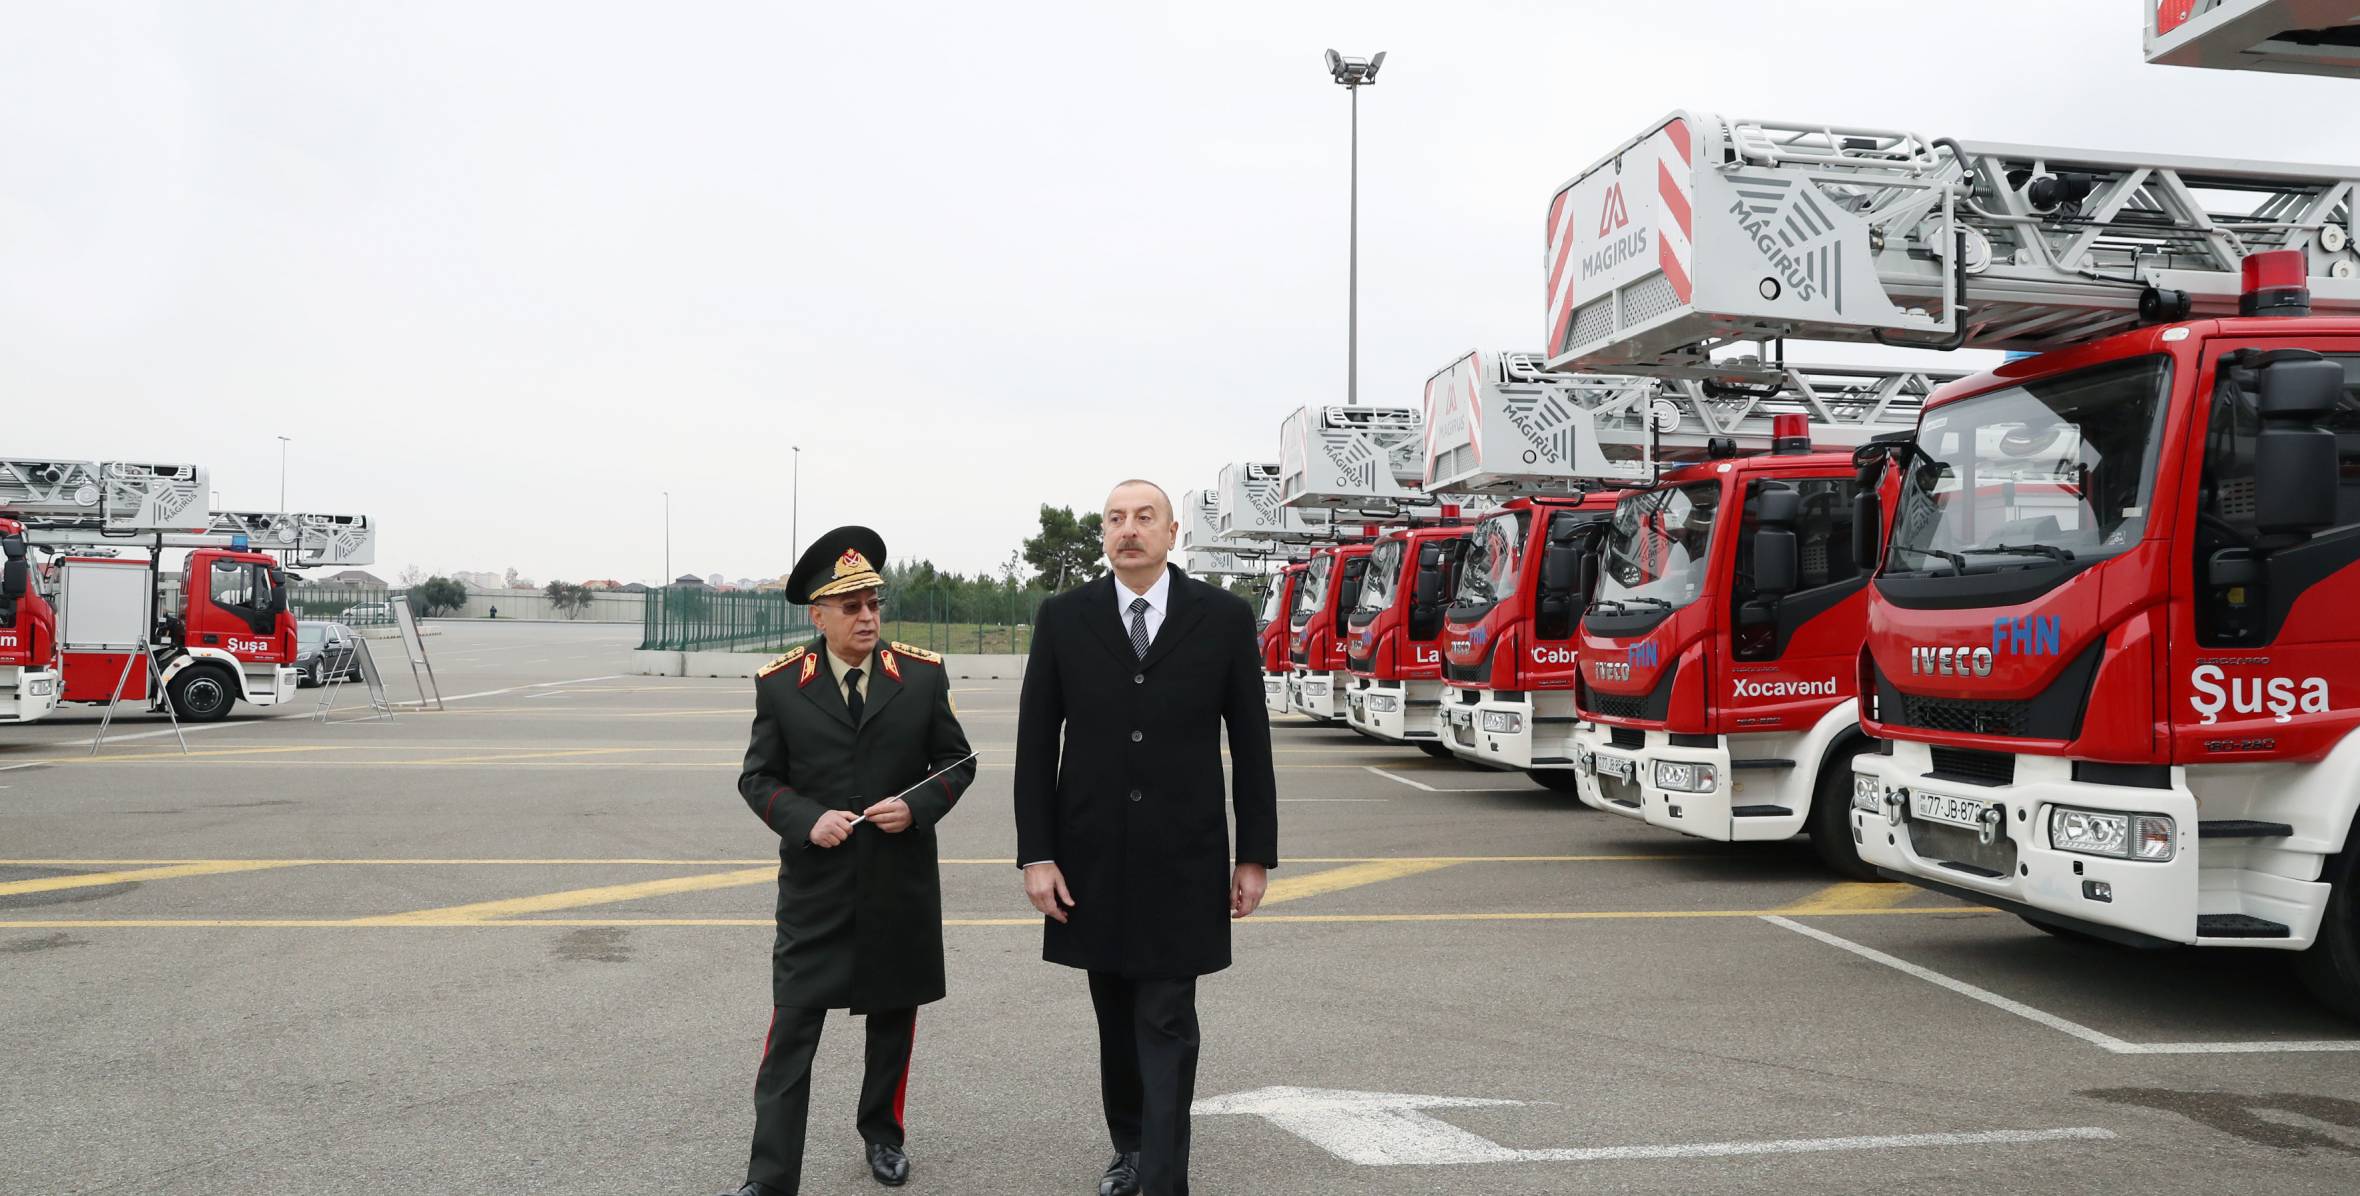 Ilham Aliyev viewed newly purchased special purpose equipment and ambulances